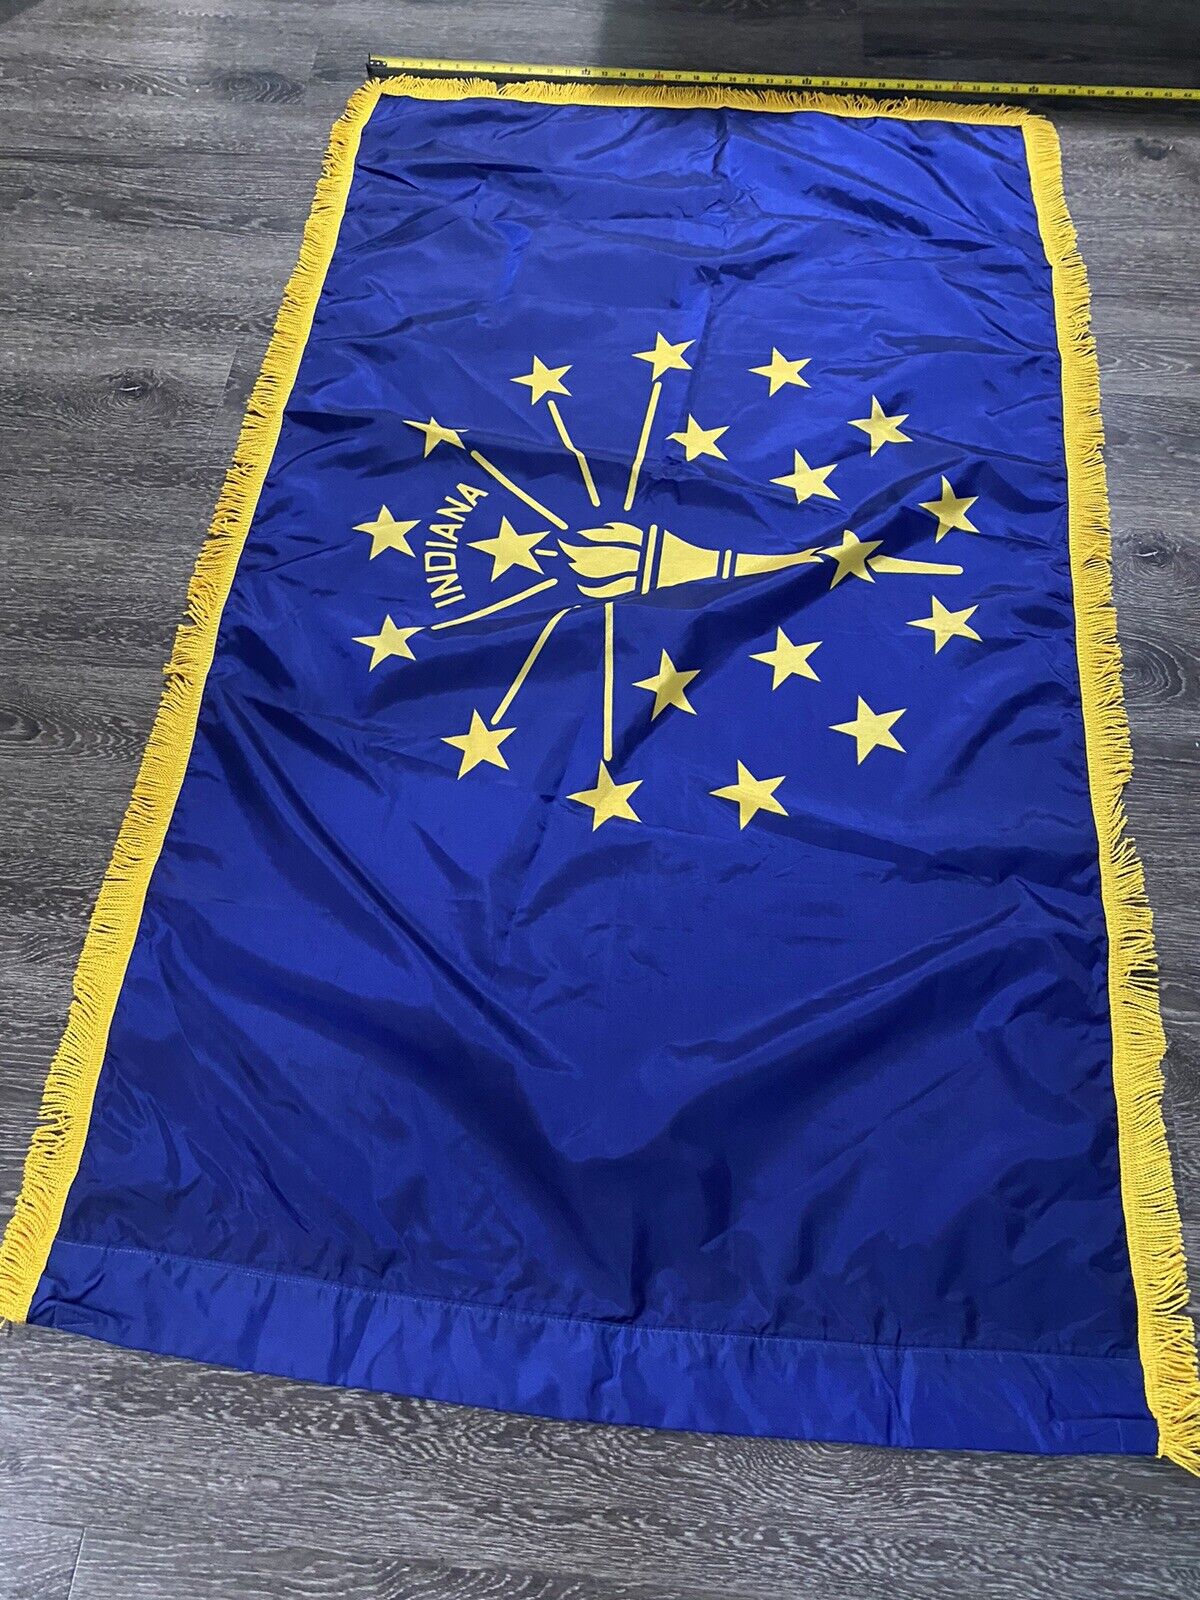 Indiana State Flag 3x5 Indoor Hem with Gold Fringe - Made in USA, High Quality